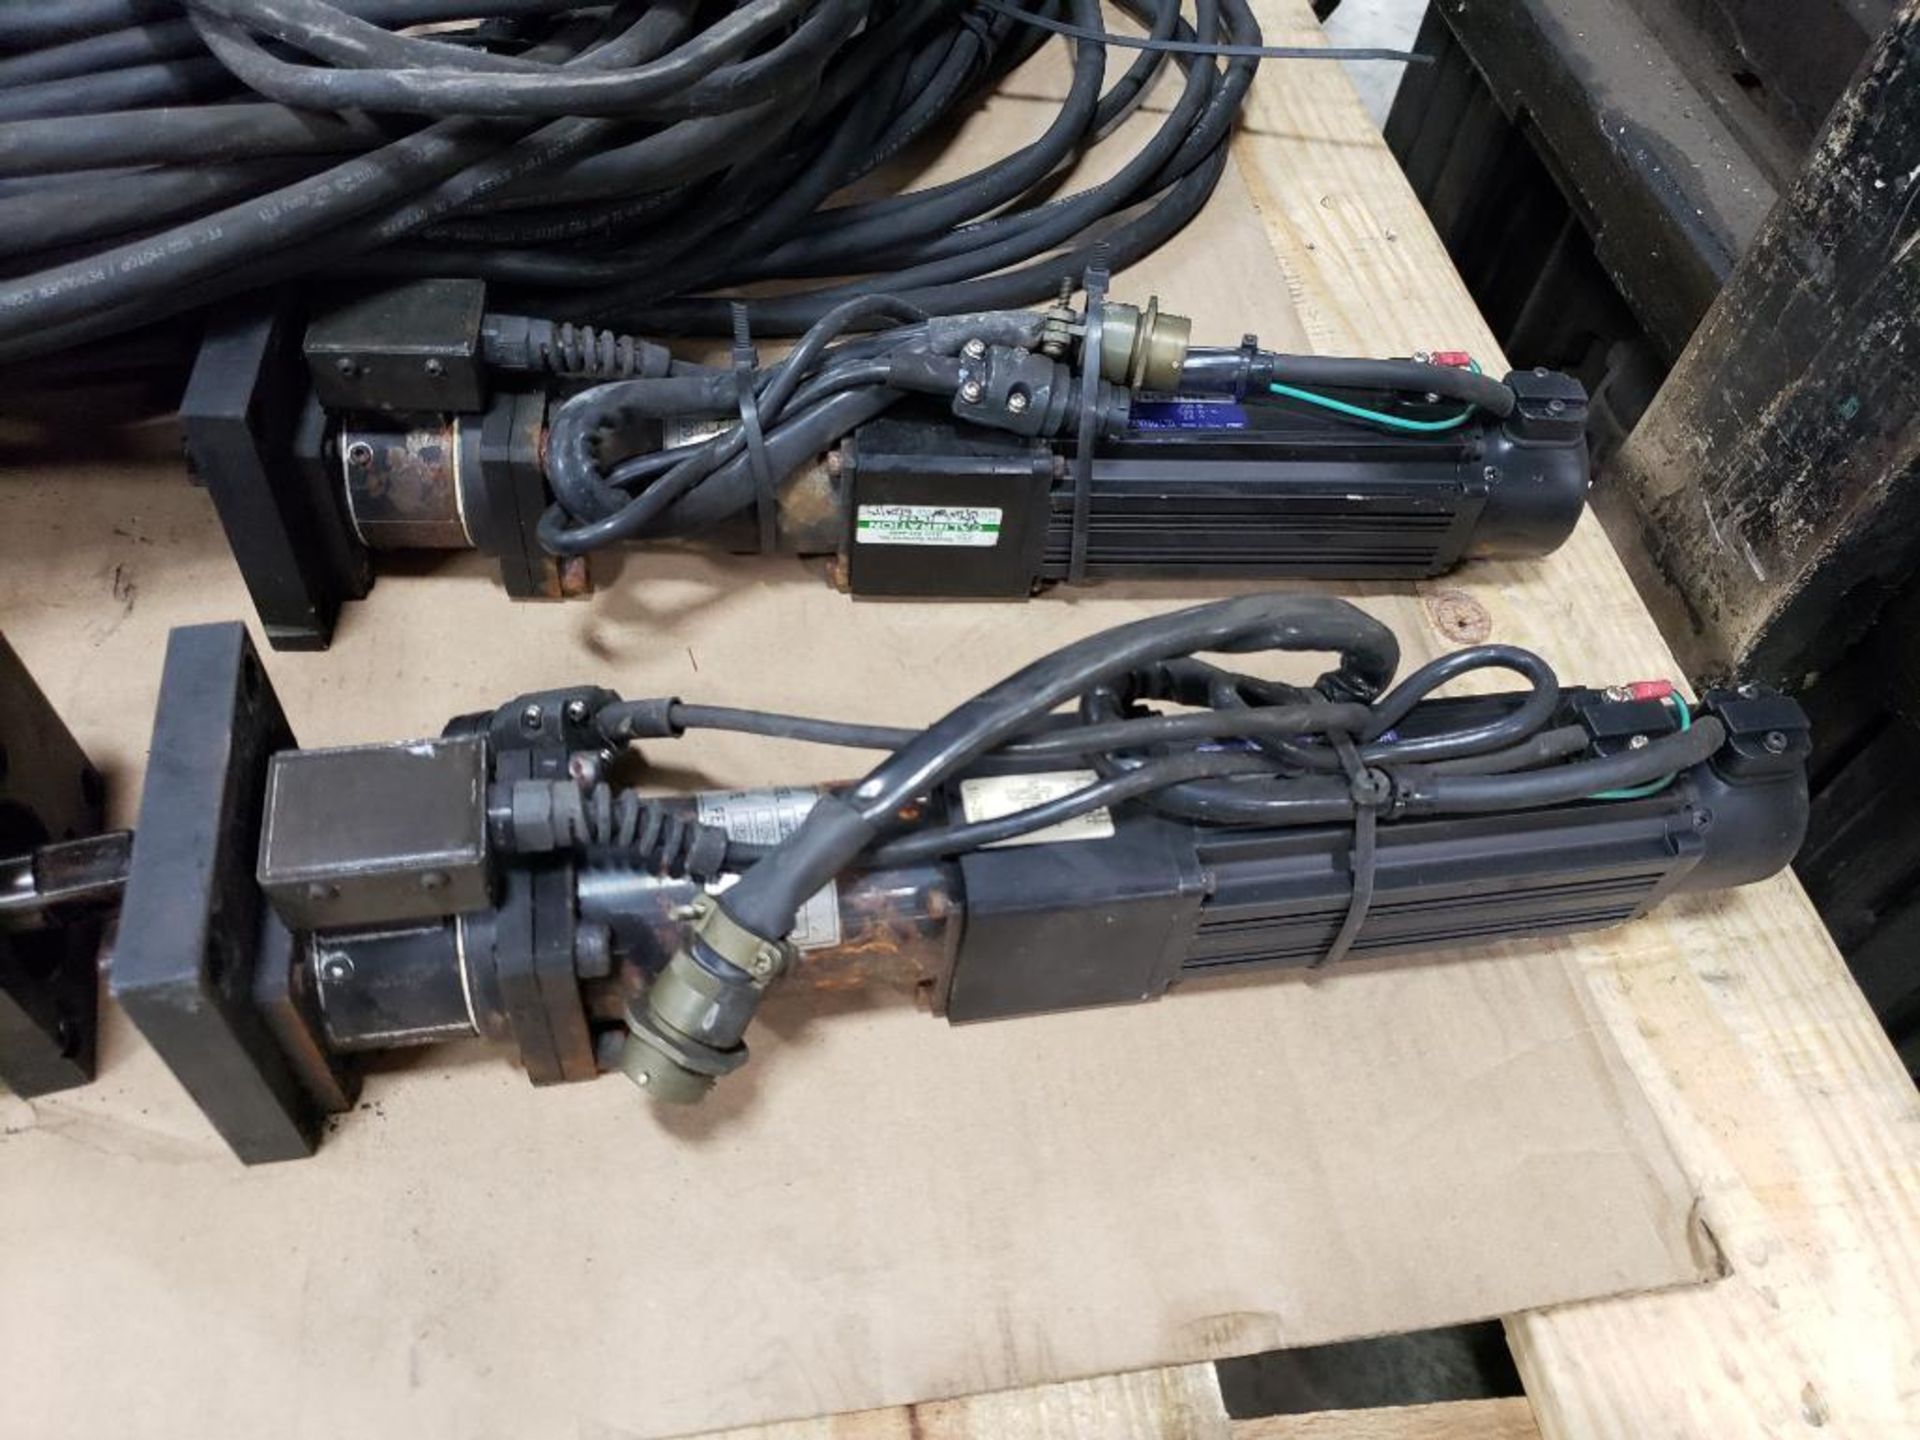 Qty 4 - FEC motorized nut runners NFT-202RM3-S and connection cords. 0.64Nm-Torque. - Image 12 of 16